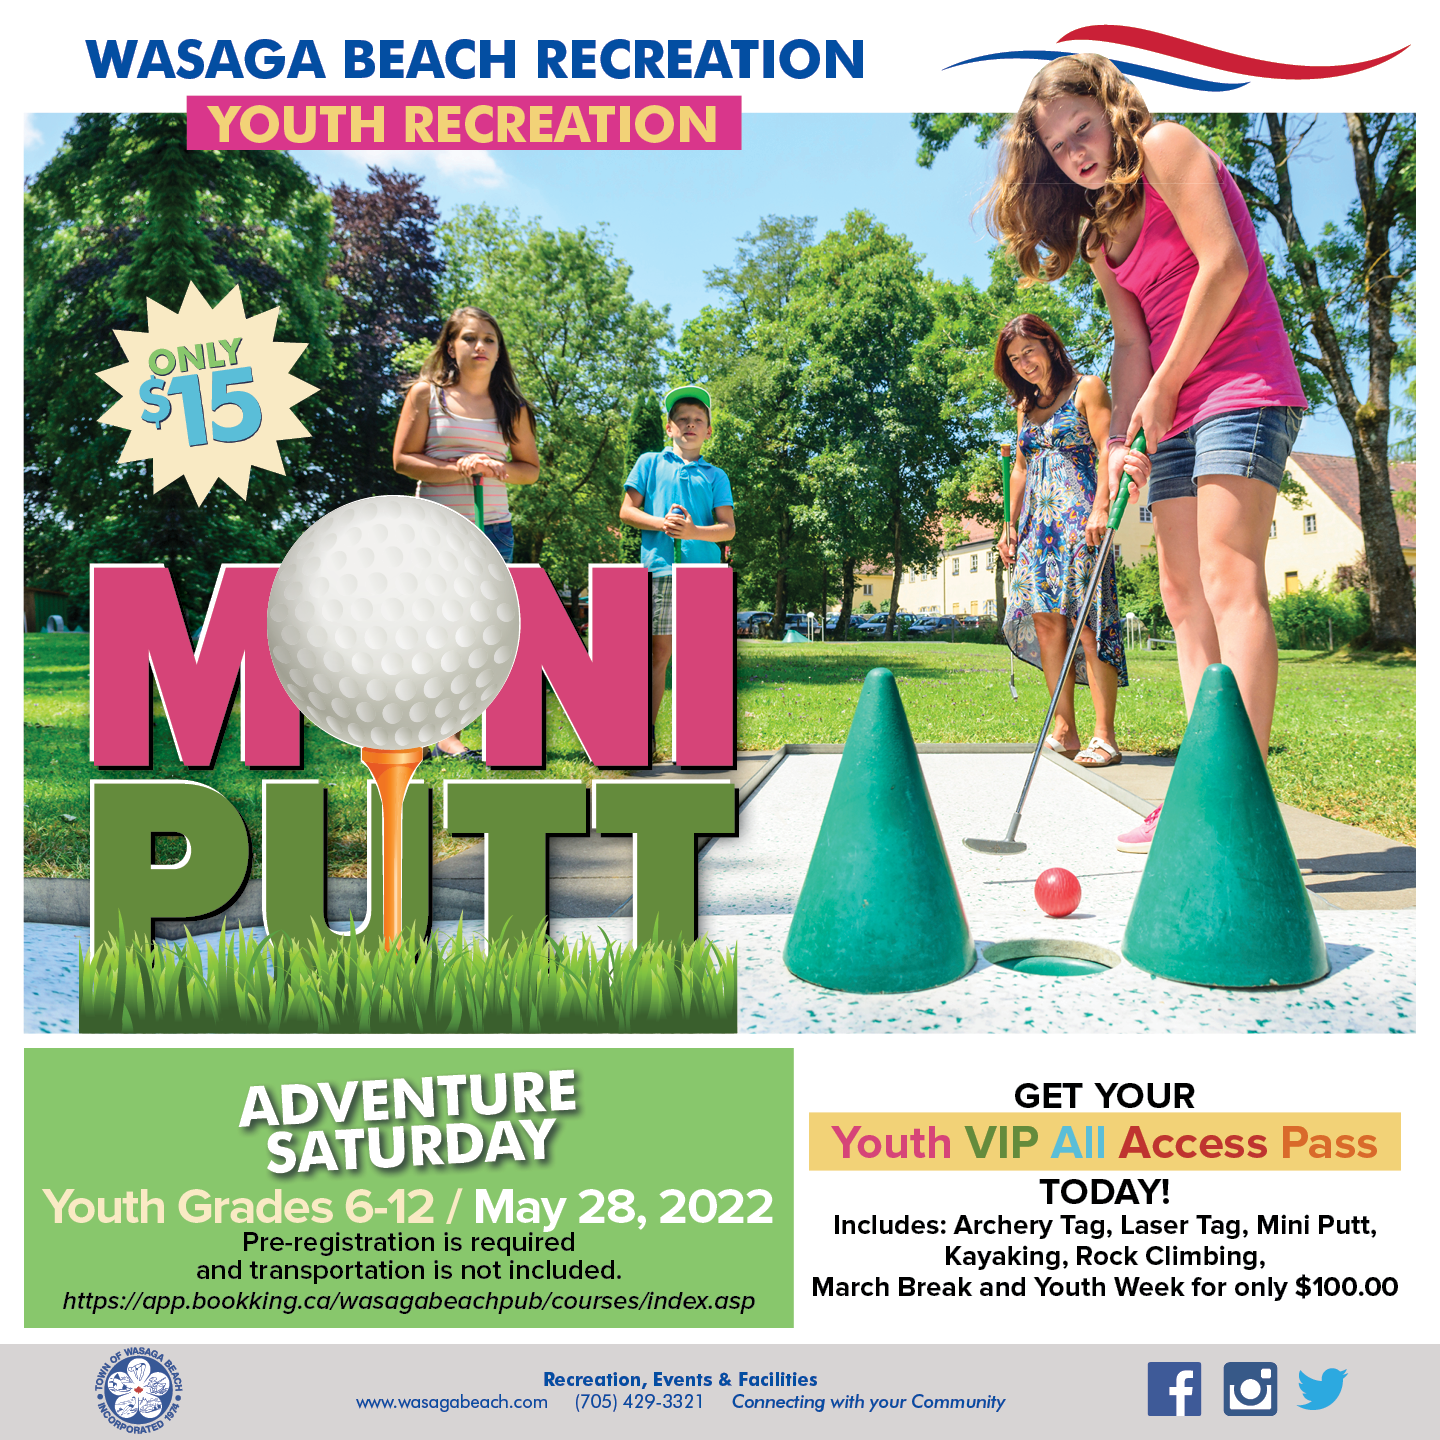 Mini Putt Poster. Image of youth playing mini putt. Mini Putt only $15.00. Adventure Saturday Youth Grades 6-12/ June 30th, 2022. Pre-registration is required and transportation is not included. https://app.bookking.ca/wasagabeachpub/courses/index.asp . Get your Youth VIP All Access Pass Today ! Includes: Archery Tag, Laser Tag, Mini Putt, Kayaking, Rock Climbing, March Break and Youth Week for only $100.00 Town footer at the bottom with contact information (705-429-3321)